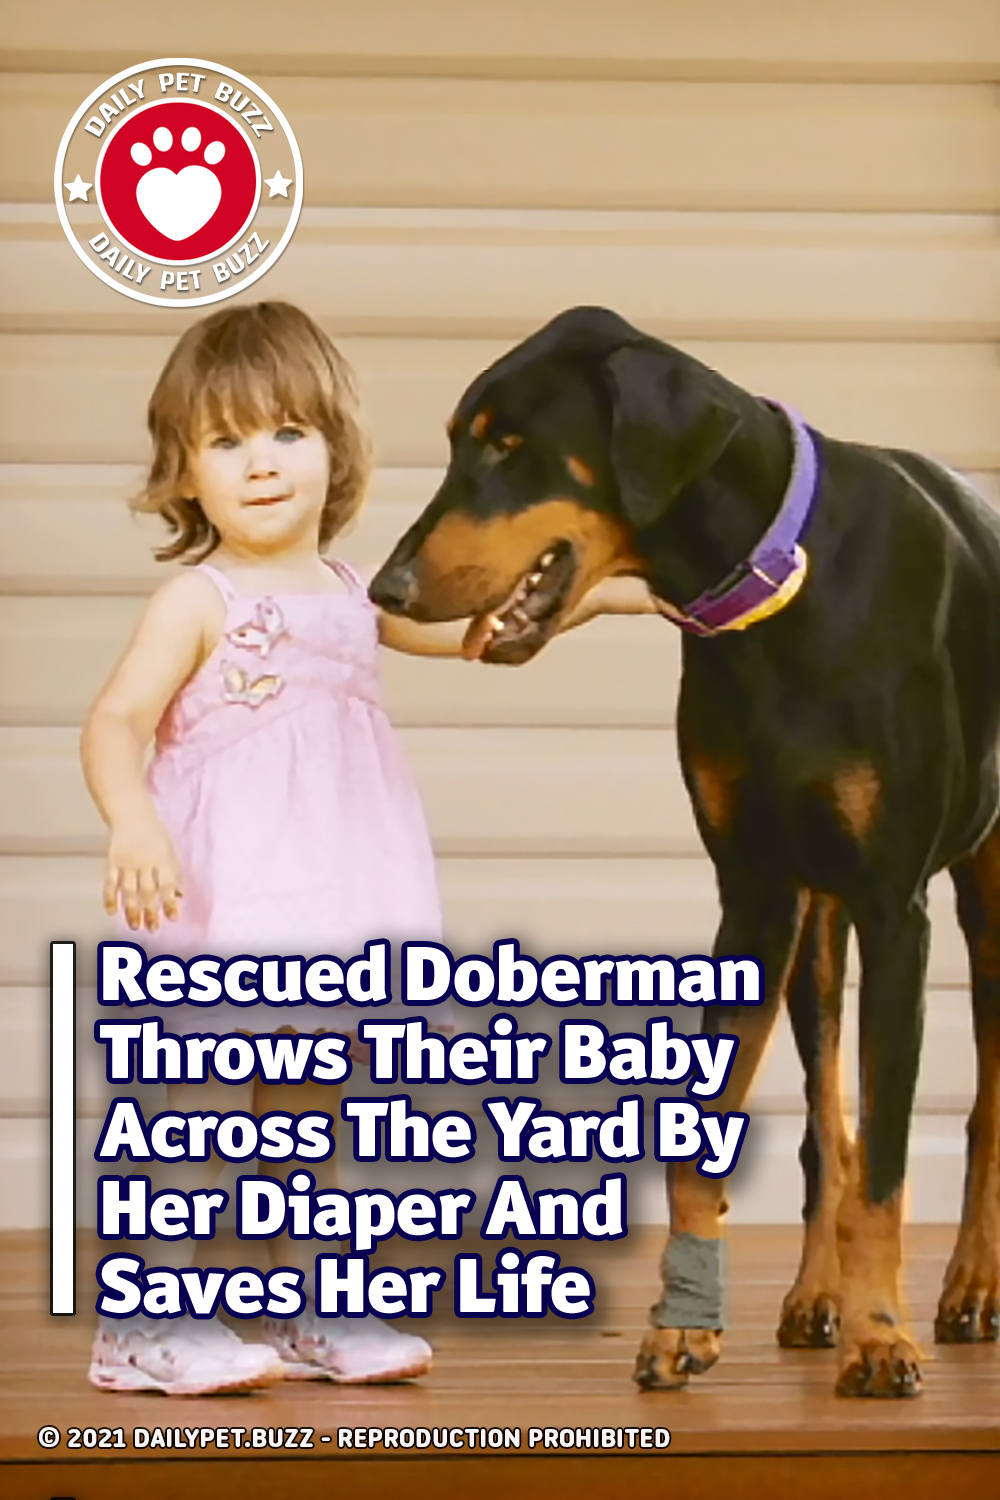 Rescued Doberman Throws Their Baby Across The Yard By Her Diaper And Saves Her Life